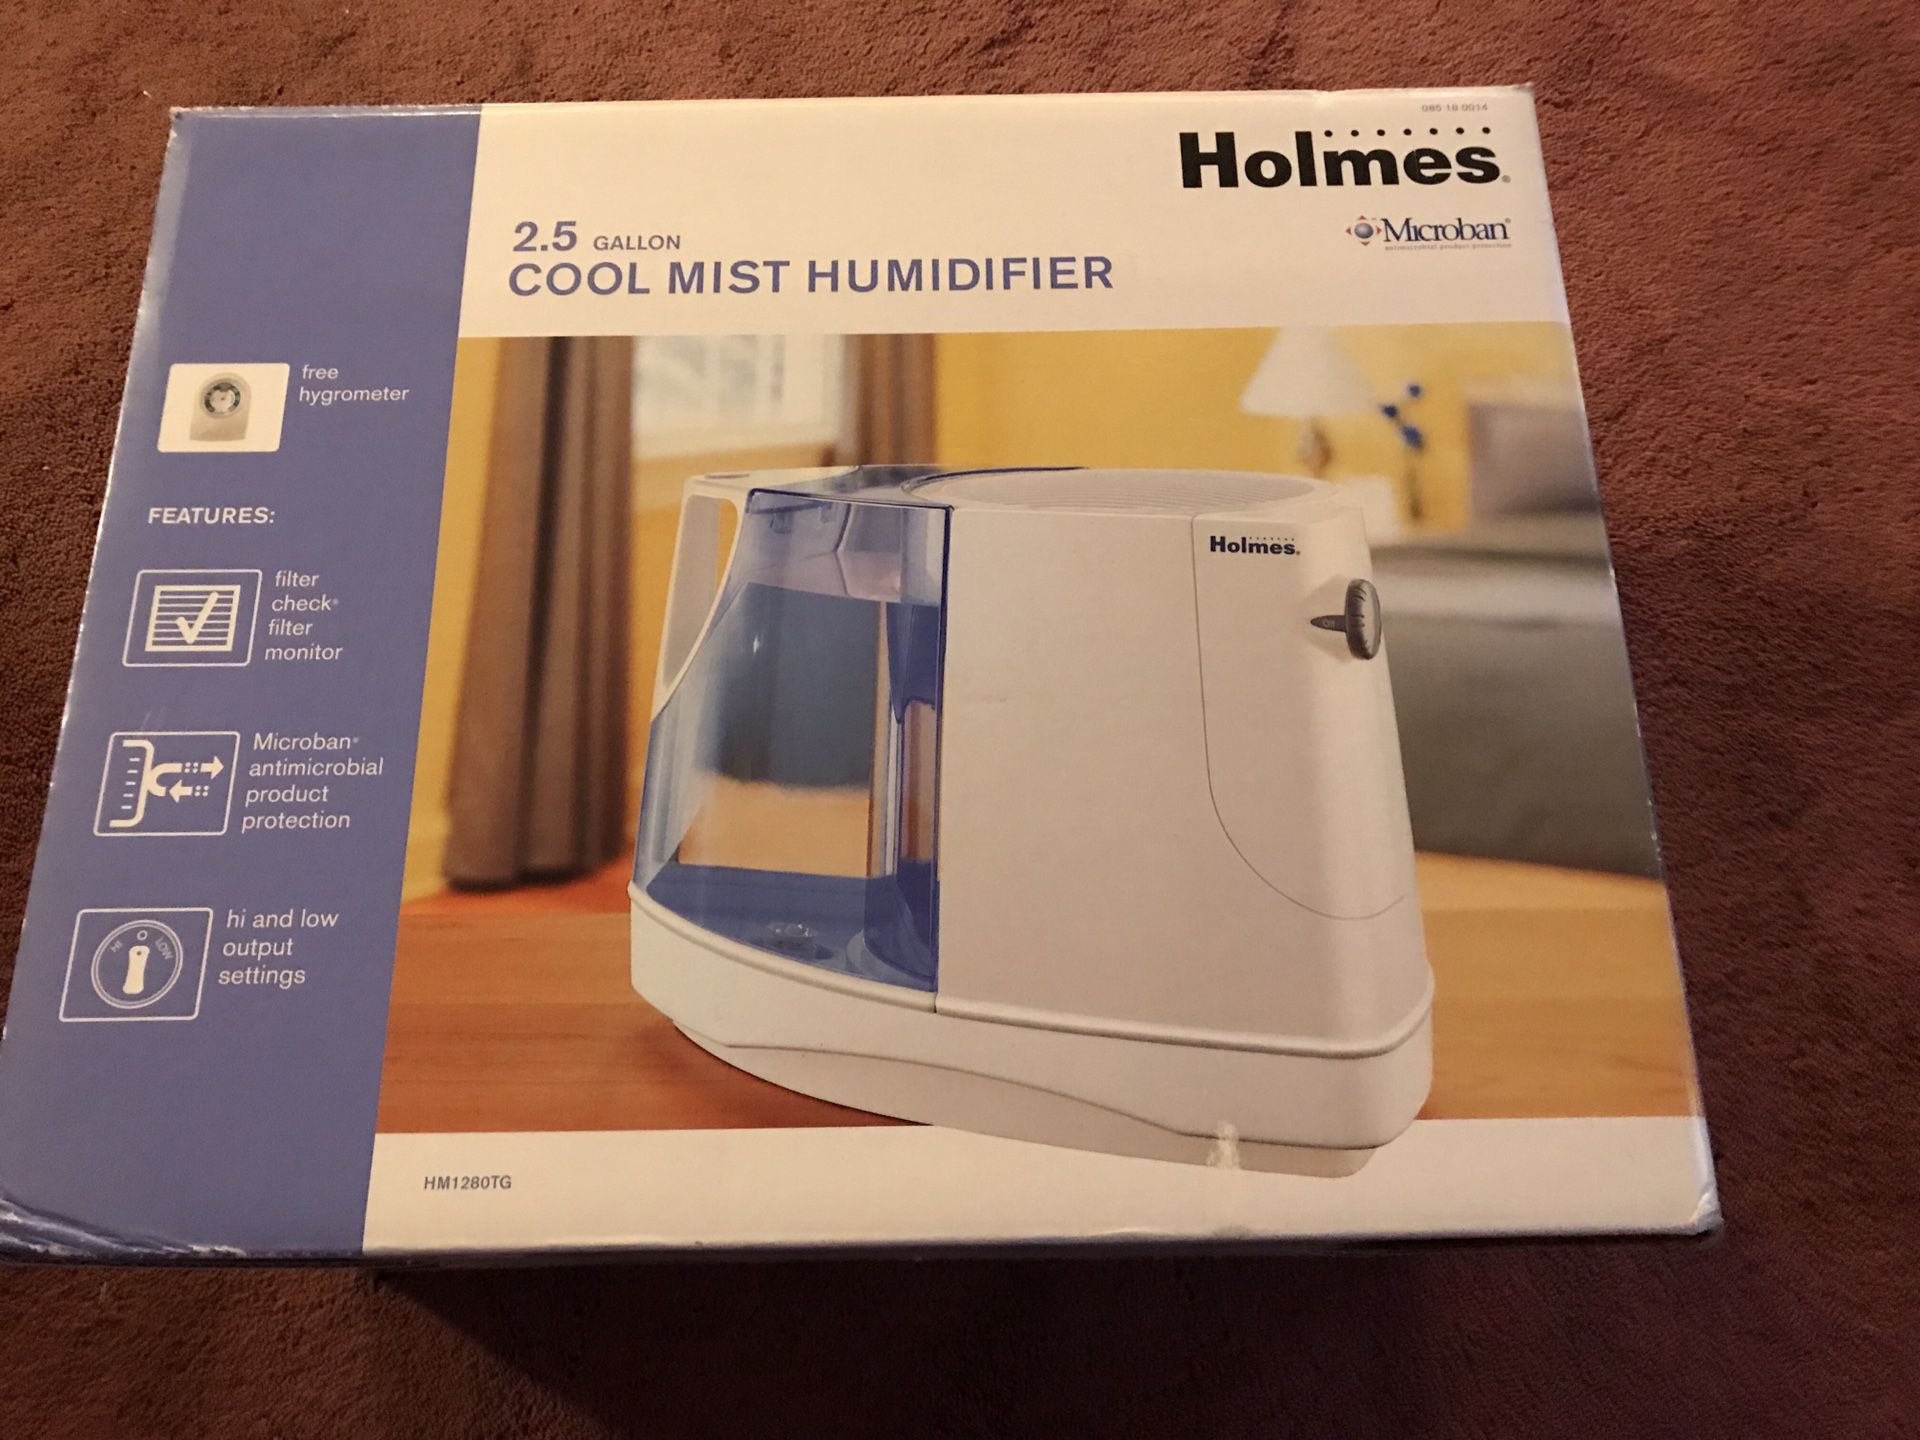 Holmes cool mist humidifier